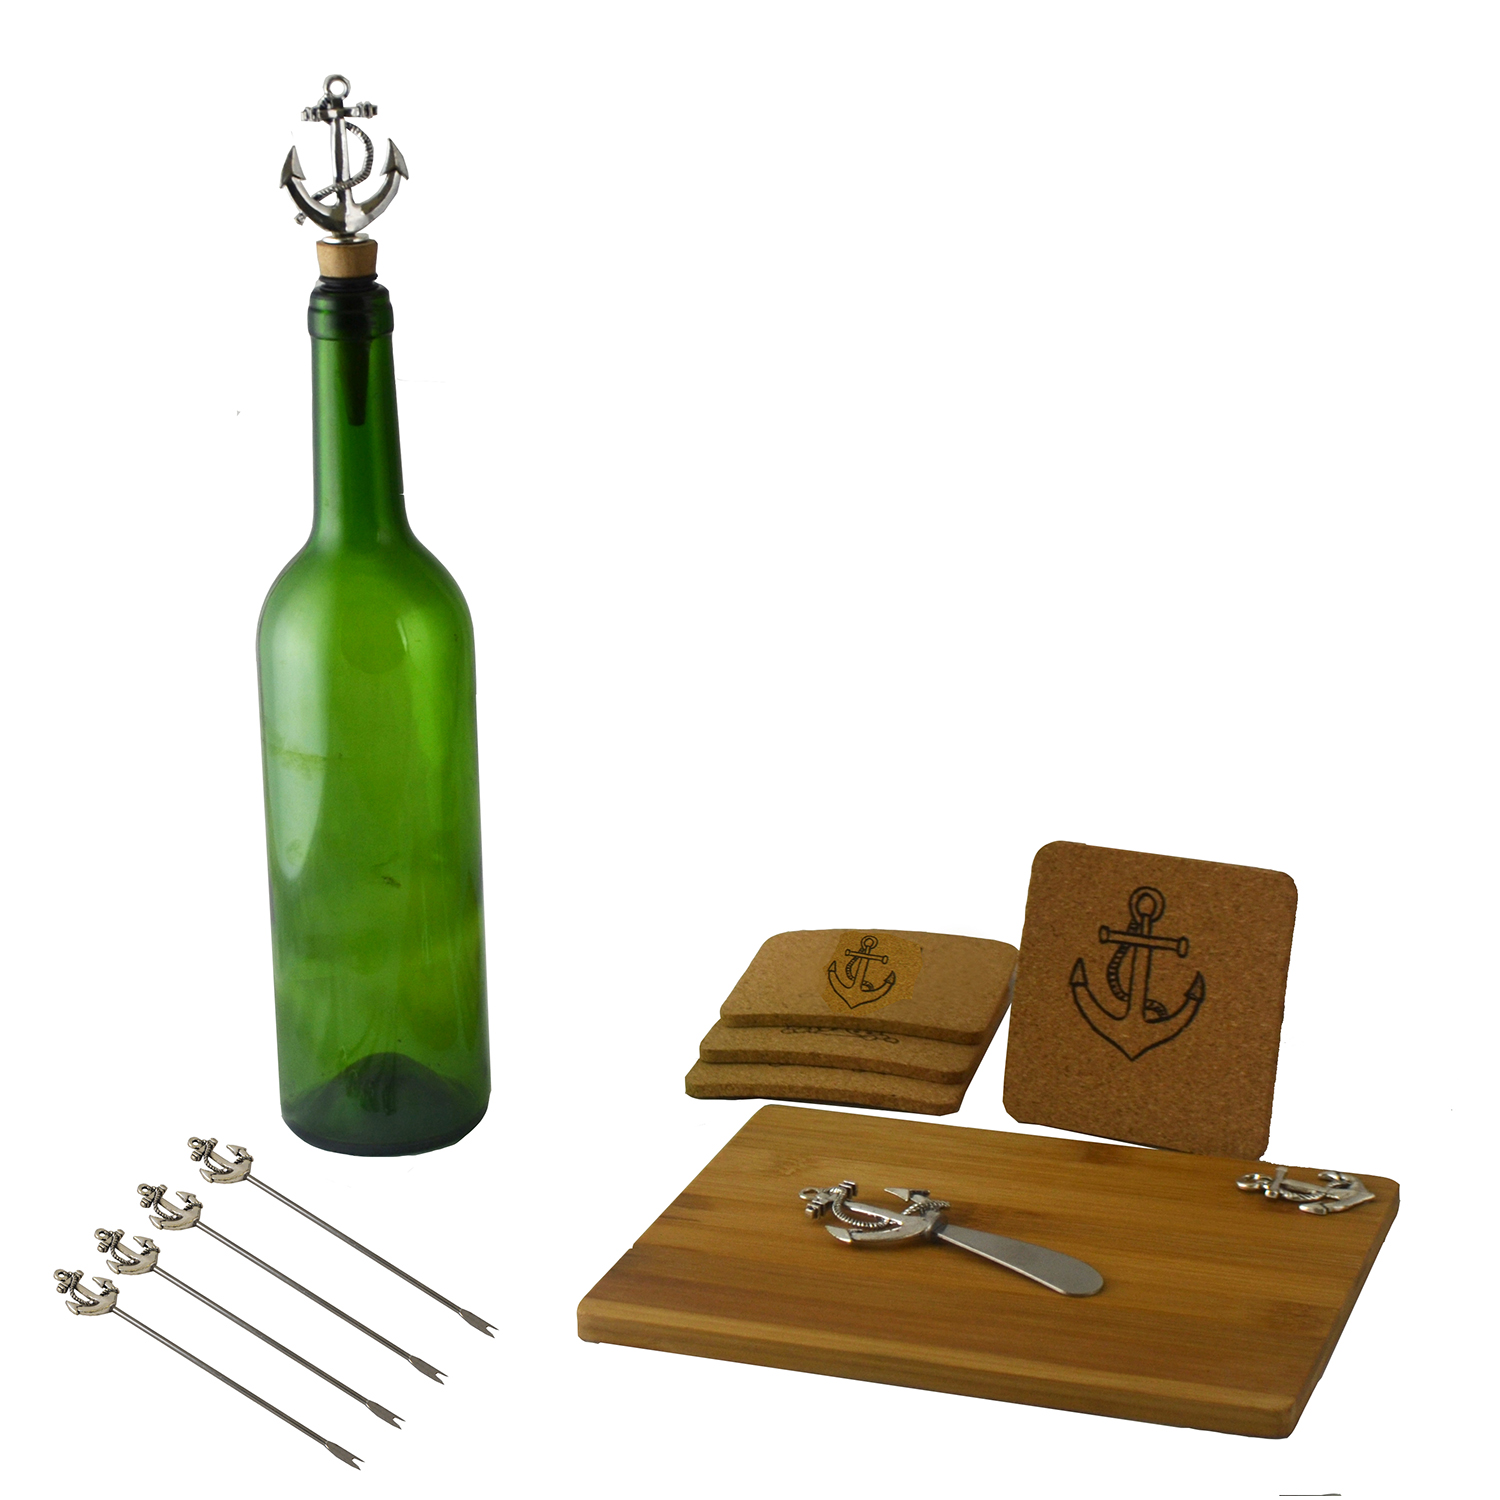 11-PC WINE & CHEESE SET, SILVER ANCHOR